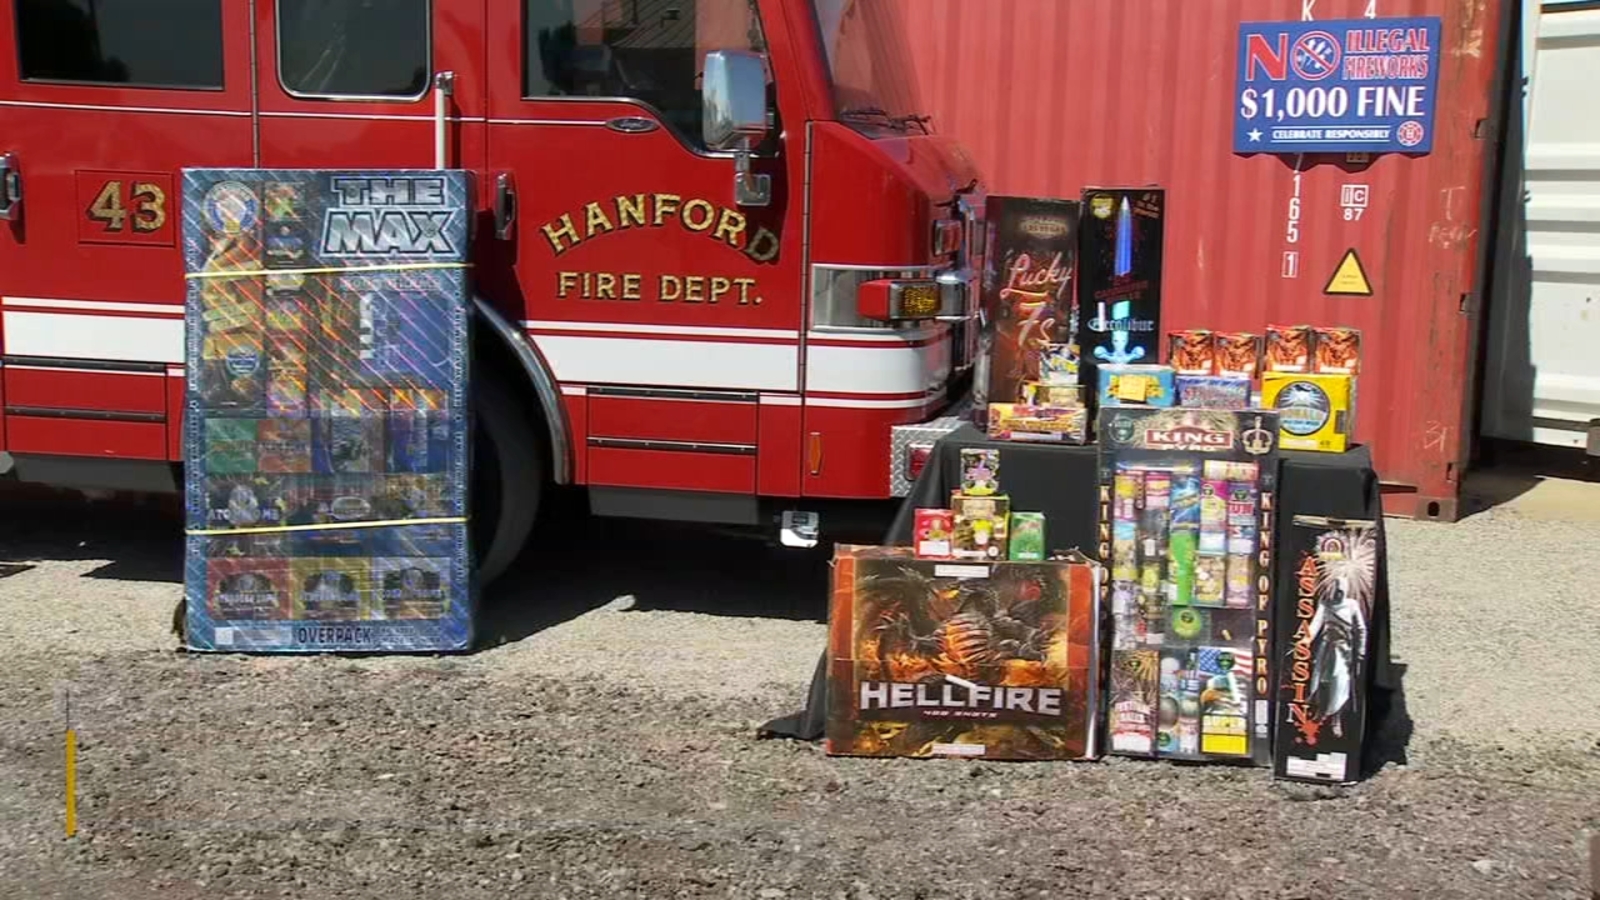 Illegal fireworks, practice bomb found at man